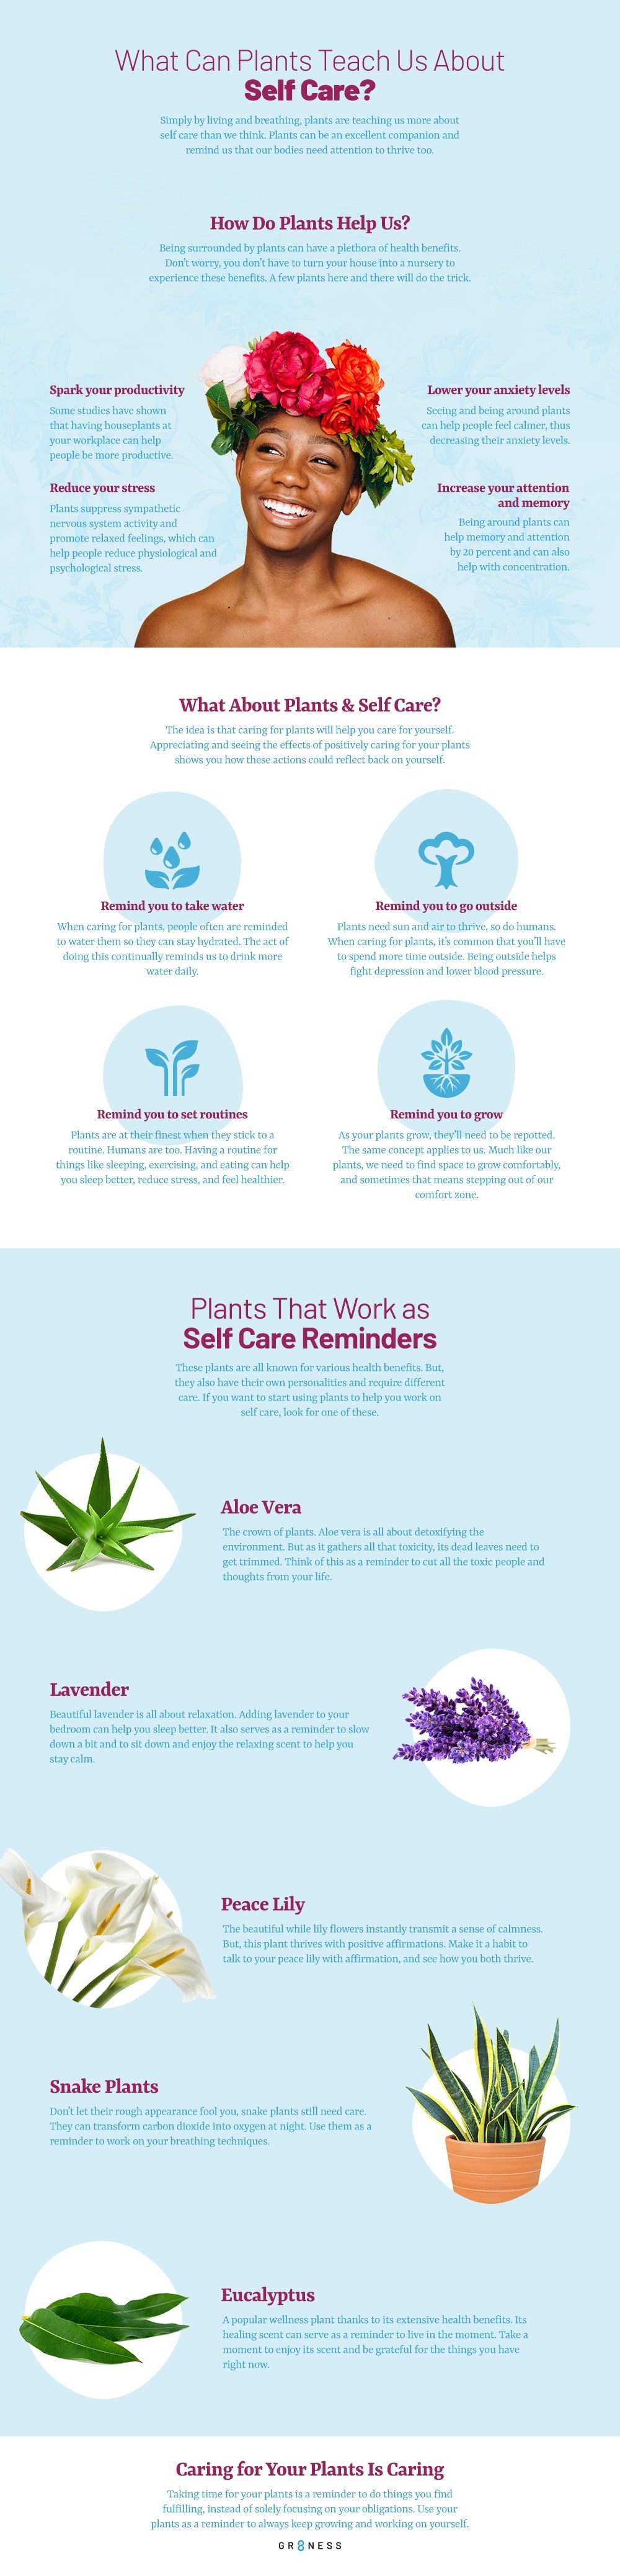 self care ideas from plants